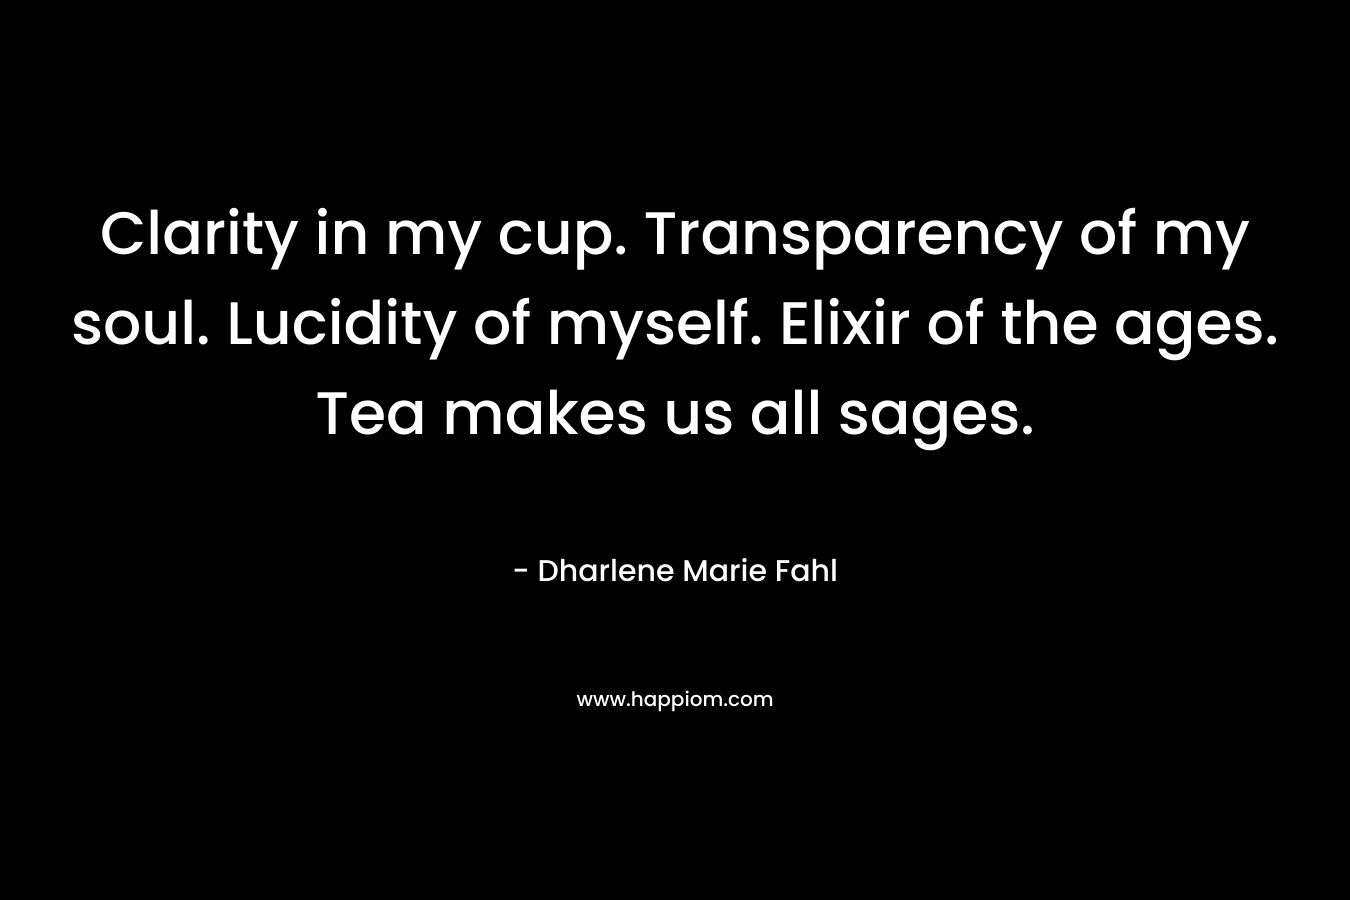 Clarity in my cup. Transparency of my soul. Lucidity of myself. Elixir of the ages. Tea makes us all sages. – Dharlene Marie Fahl